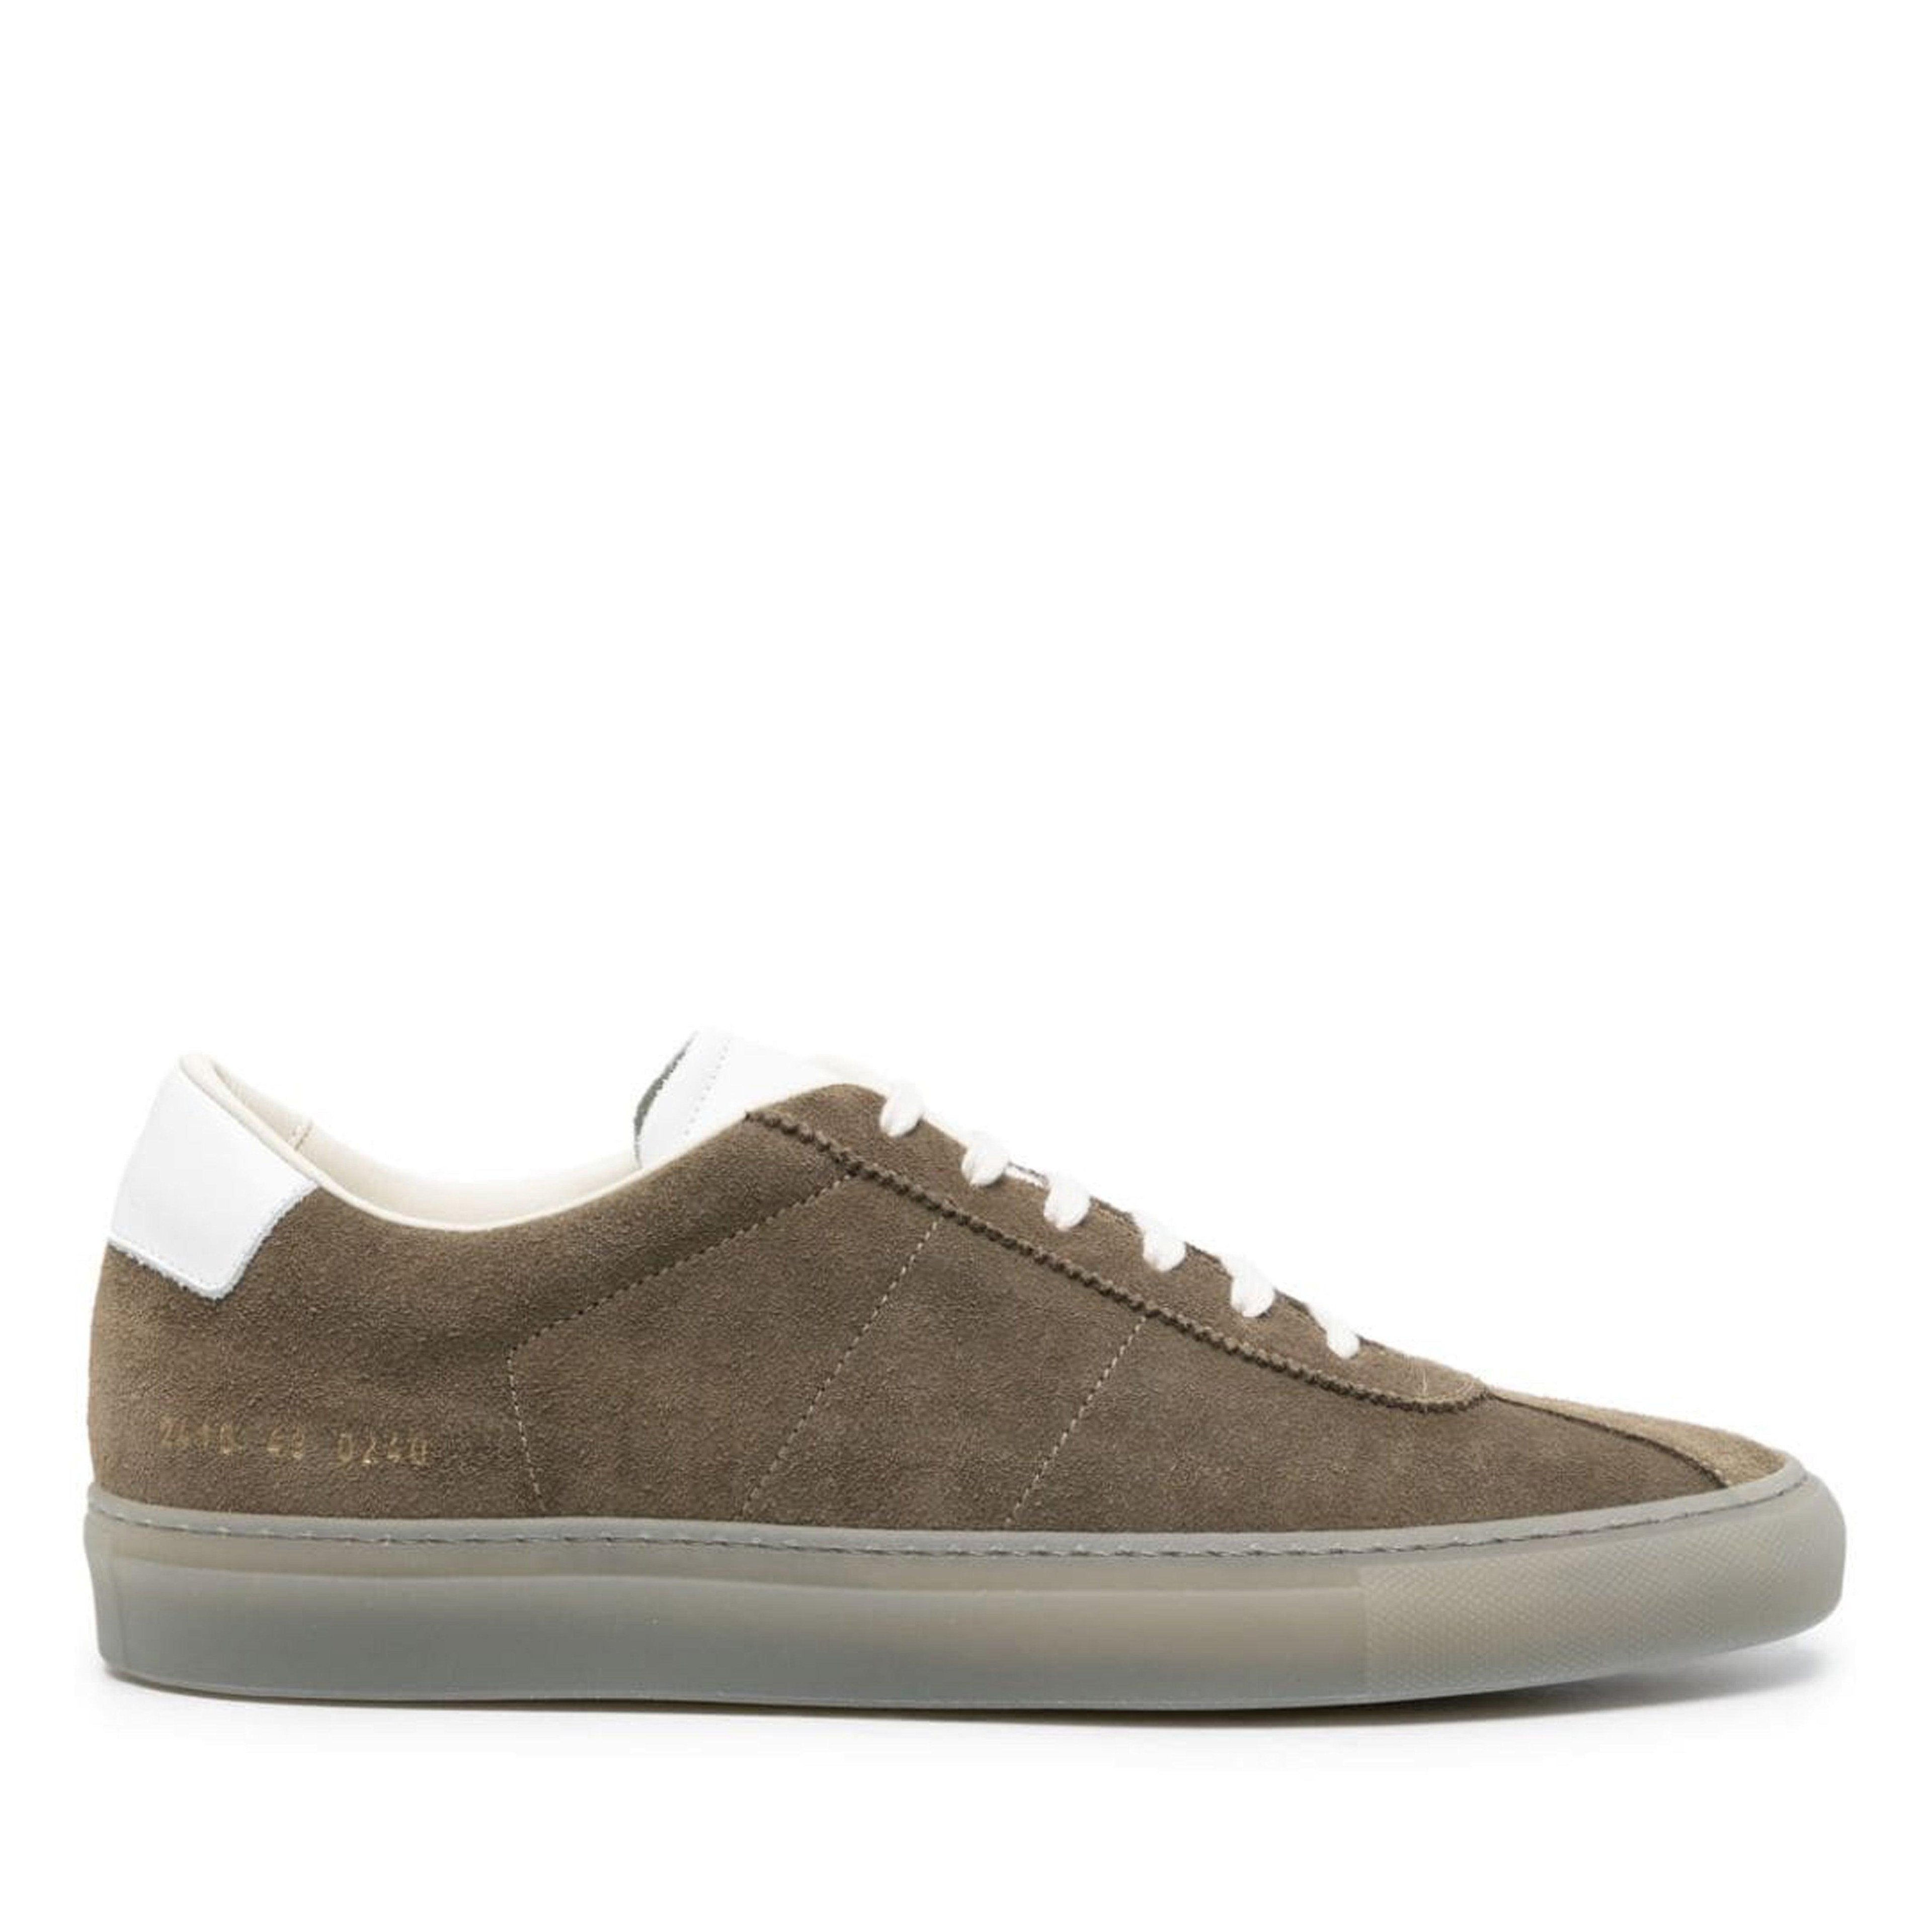 Common Projects - Tennis 70 Sneakers - (Taupe) by COMMON PROJECTS